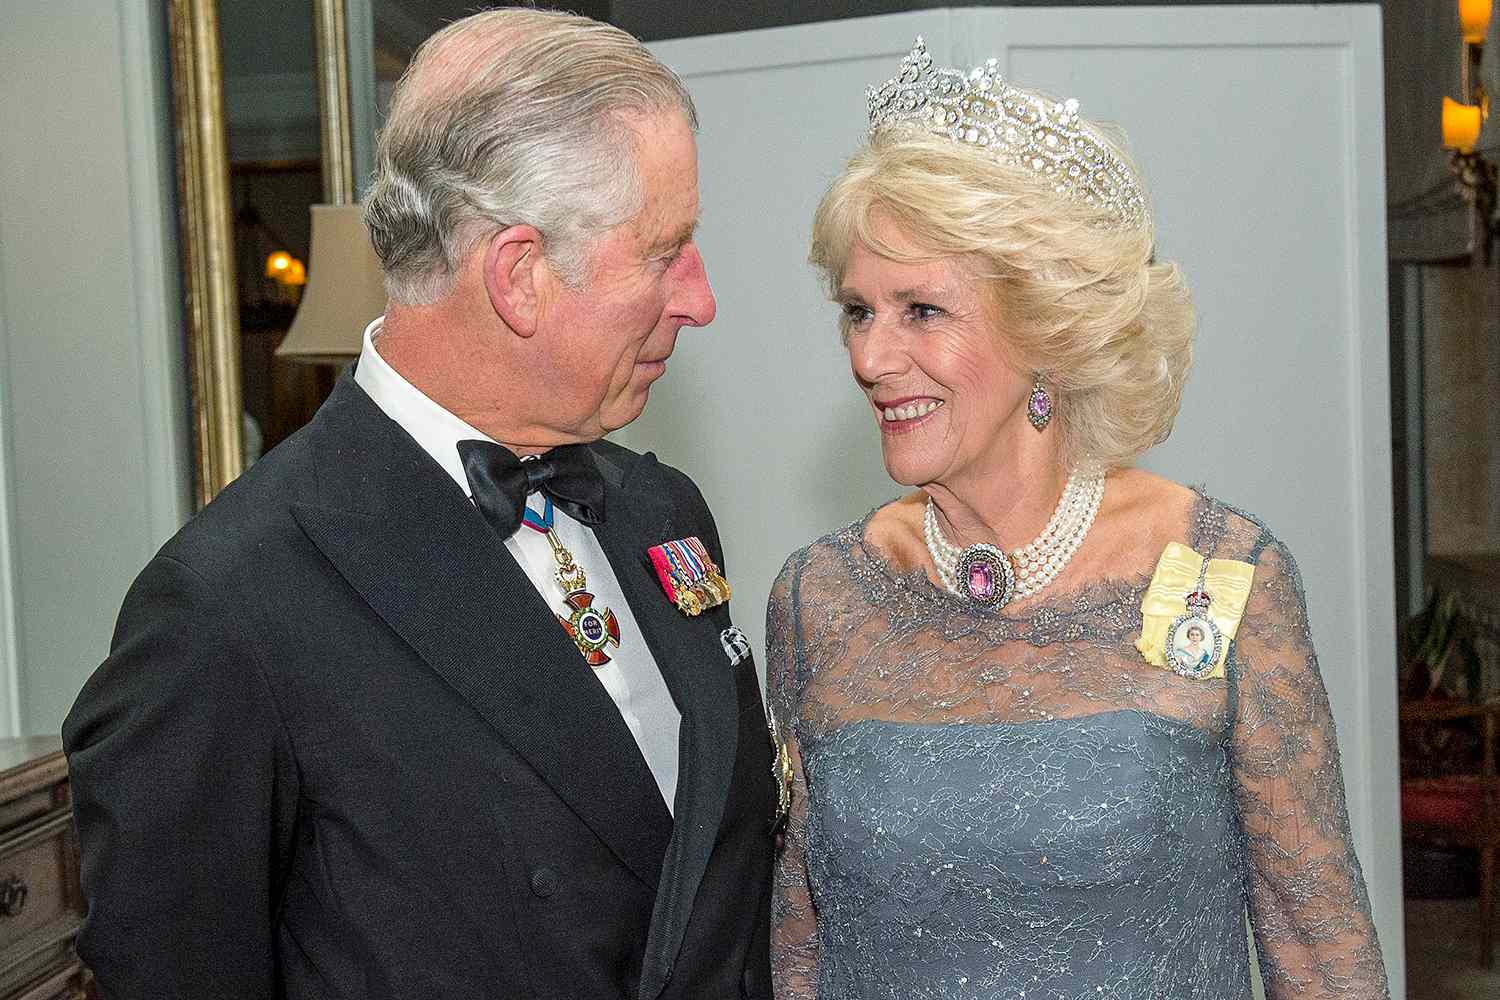 Prince Charles, Prince of Wales accompanied by Camilla, Duchess of Cornwall attend the CHOGM Banquet in Malta on November 27, 2015 near Attard, Malta. Queen Elizabeth II, The Duke of Edinburgh, Prince Charles, Prince of Wales and Camilla, Duchess of Cornwall arrived in Malta are on their final day of a visit to the island that has been hosting the Commonwealth Heads of State Summit.